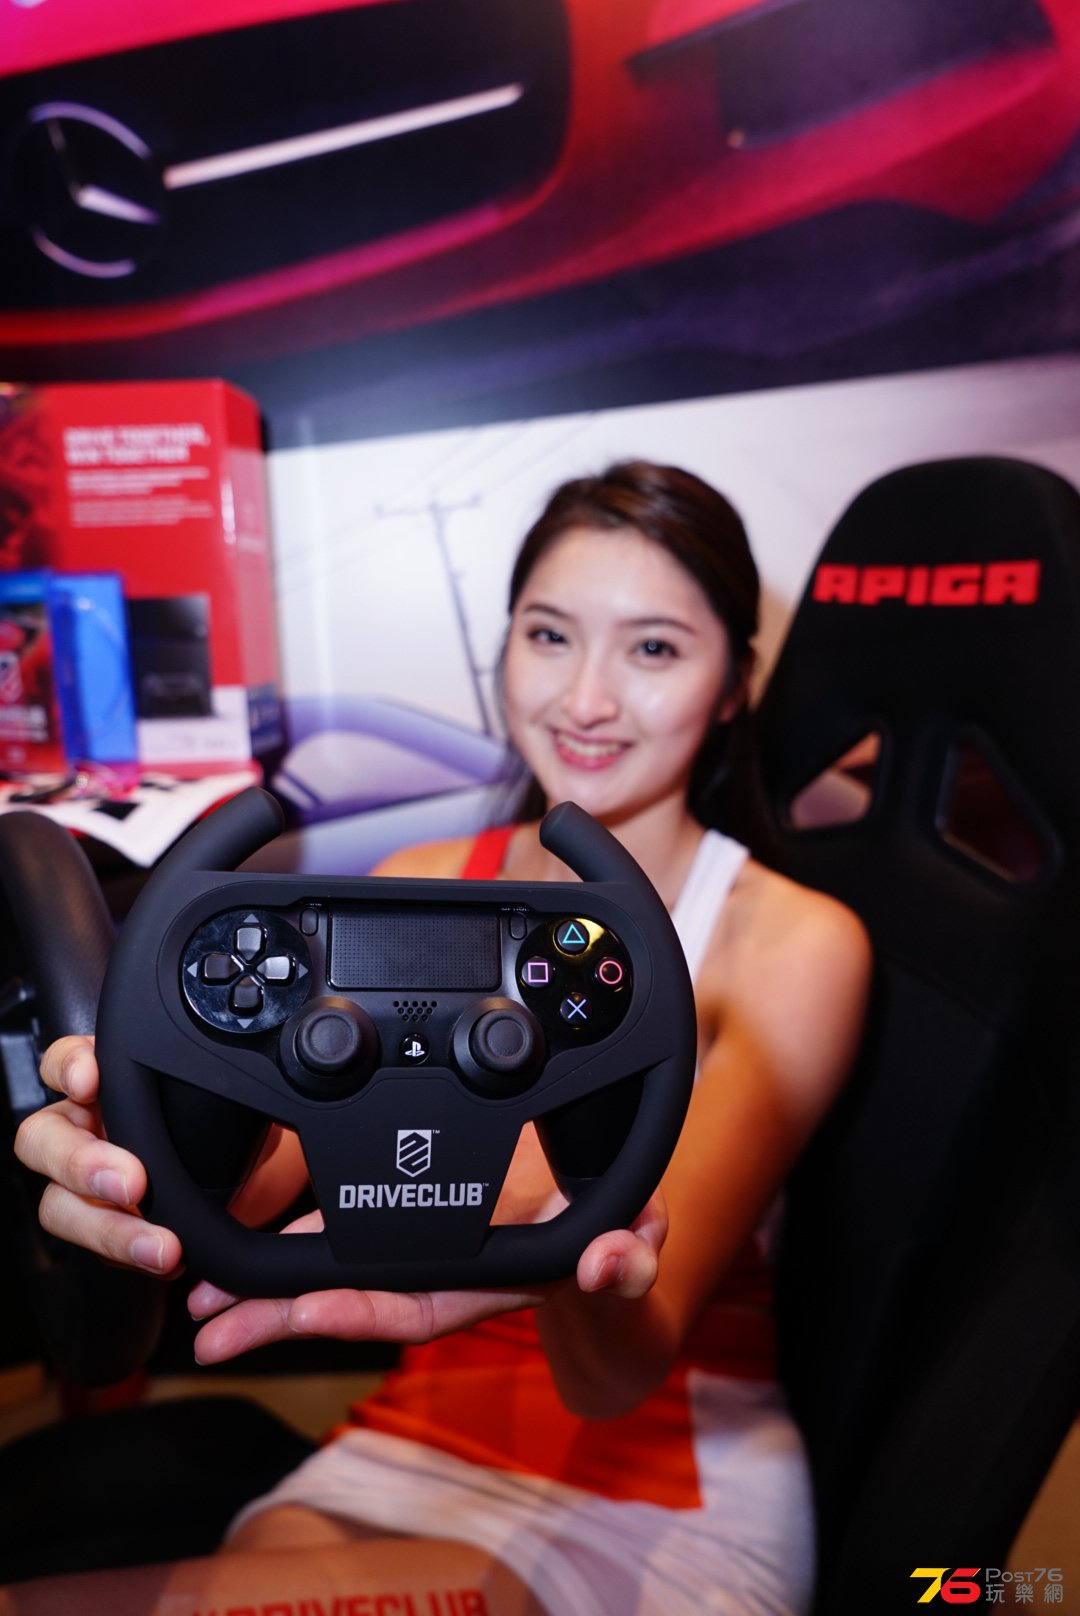 DRIVECLUB_SCEH Event_Compact Racing Wheel.JPG